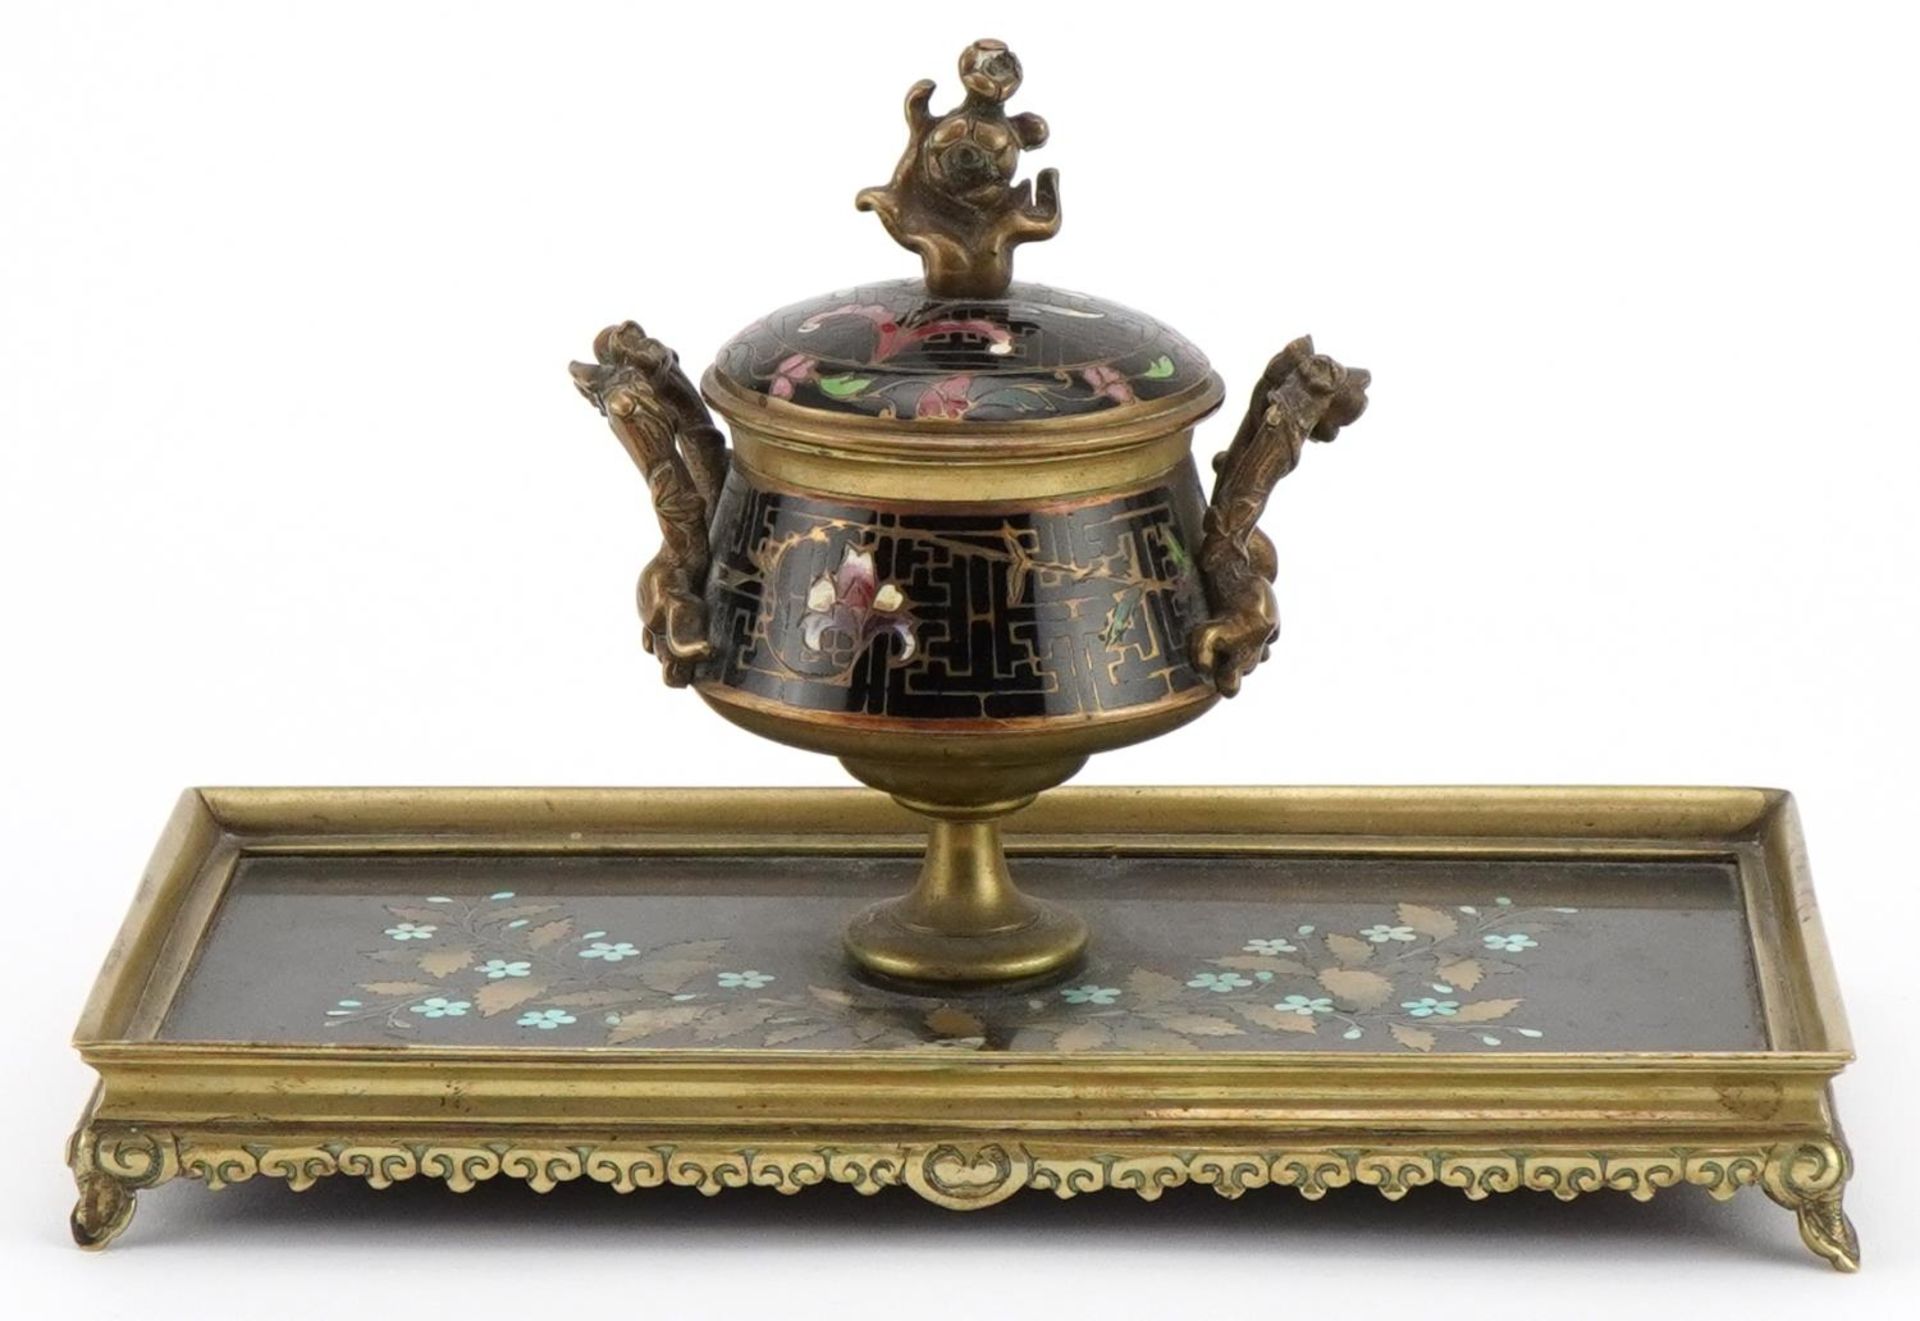 19th century ornate brass pietra dura and cloisonne desk inkwell with glass liner finely inlaid - Image 2 of 8